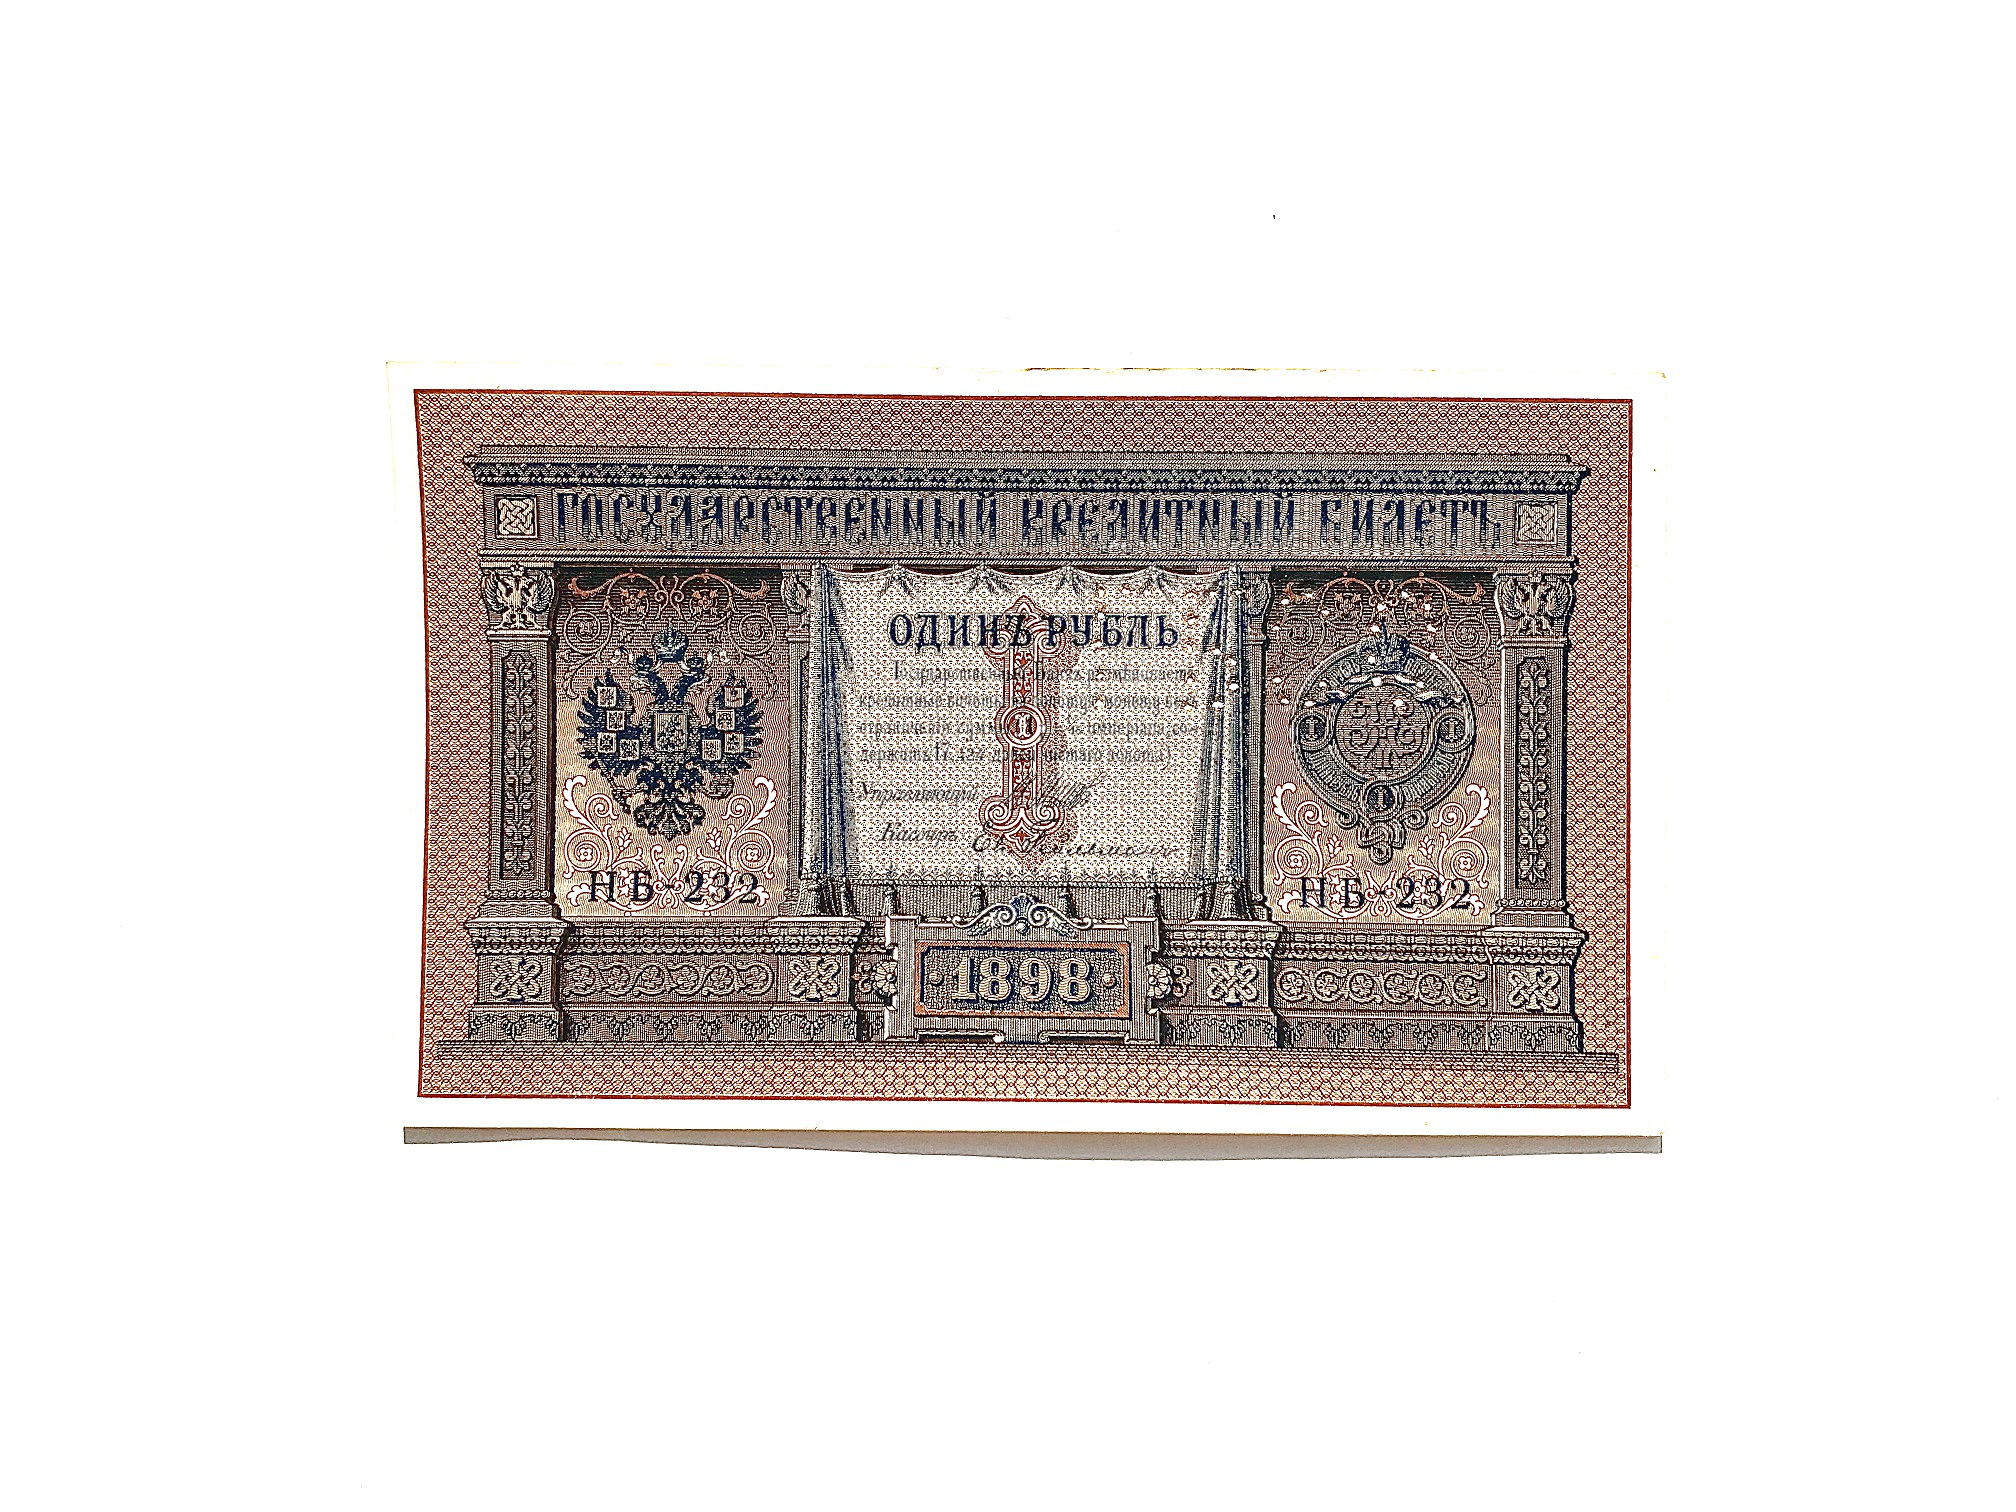 1 Ruble banknote, Russia, Northern Region, 1898 | Hobby Keeper Articles